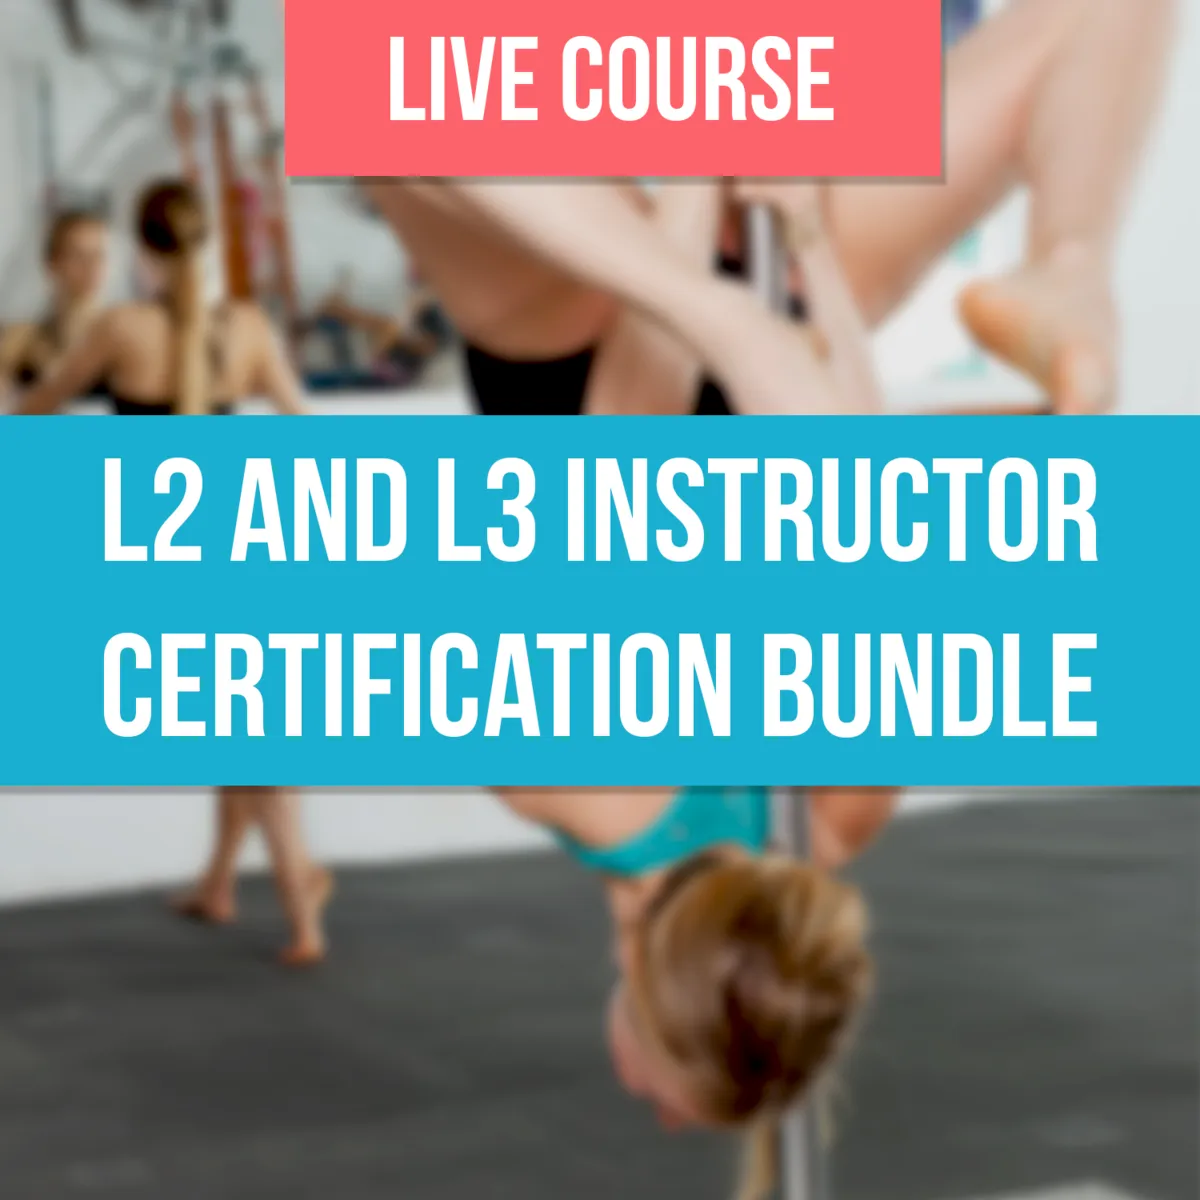 Level 2 and 3 Bundle - Las Vegas, October 15 and 16, 2022: DEPOSIT ONLY